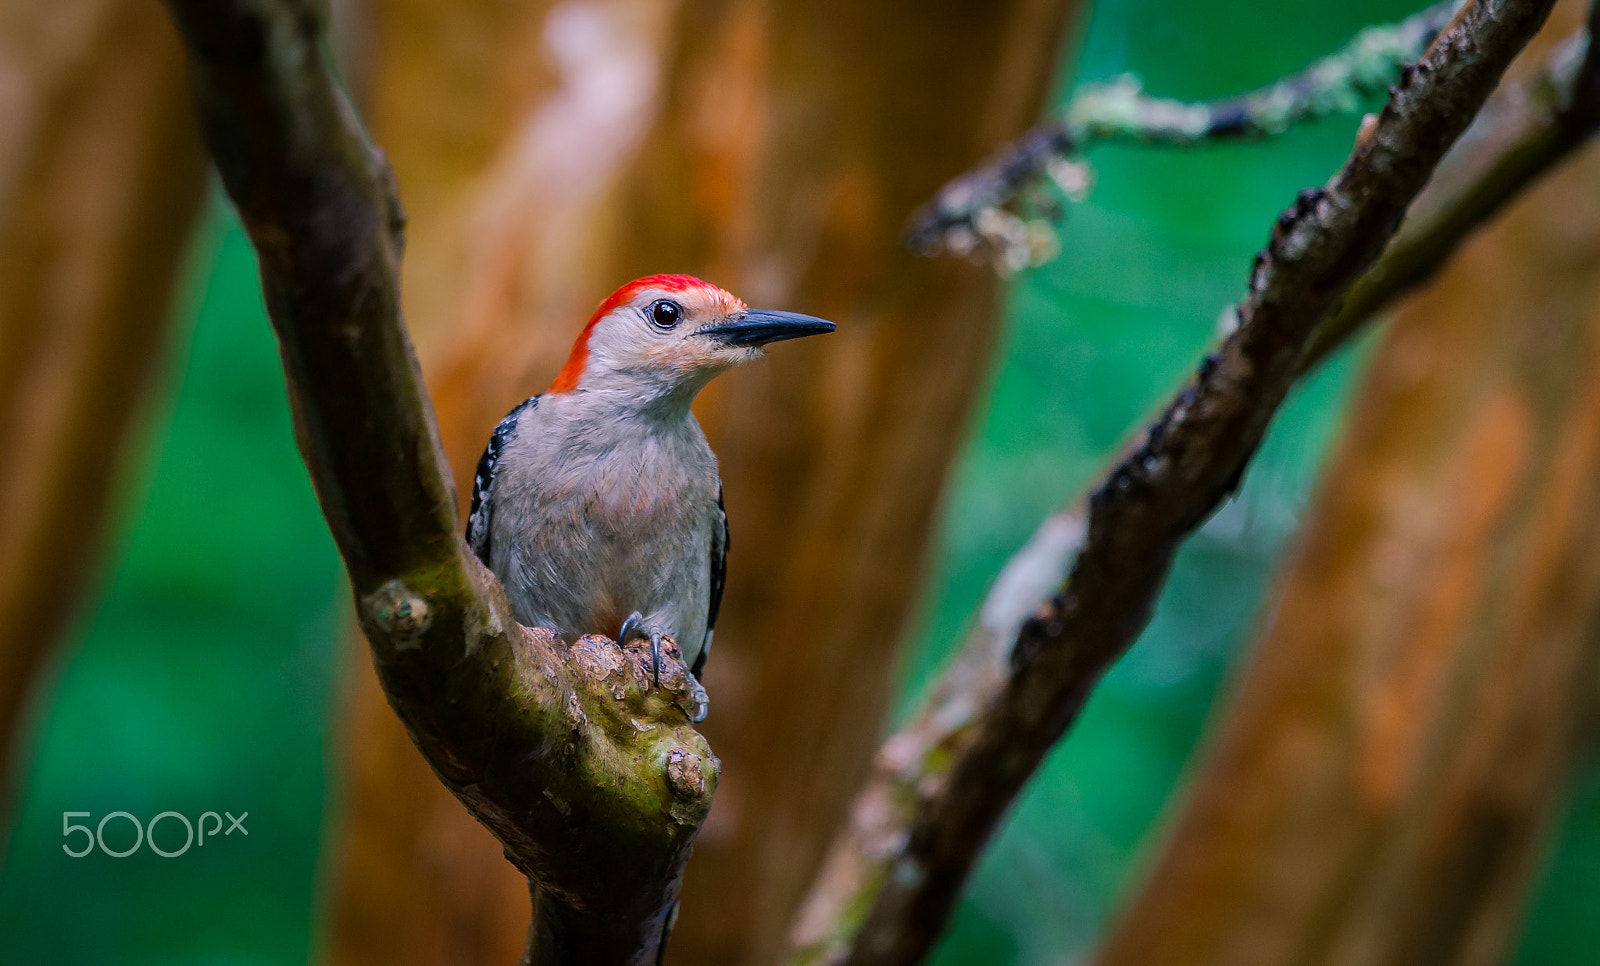 Sony a99 II sample photo. Red-bellied woodpecker photography